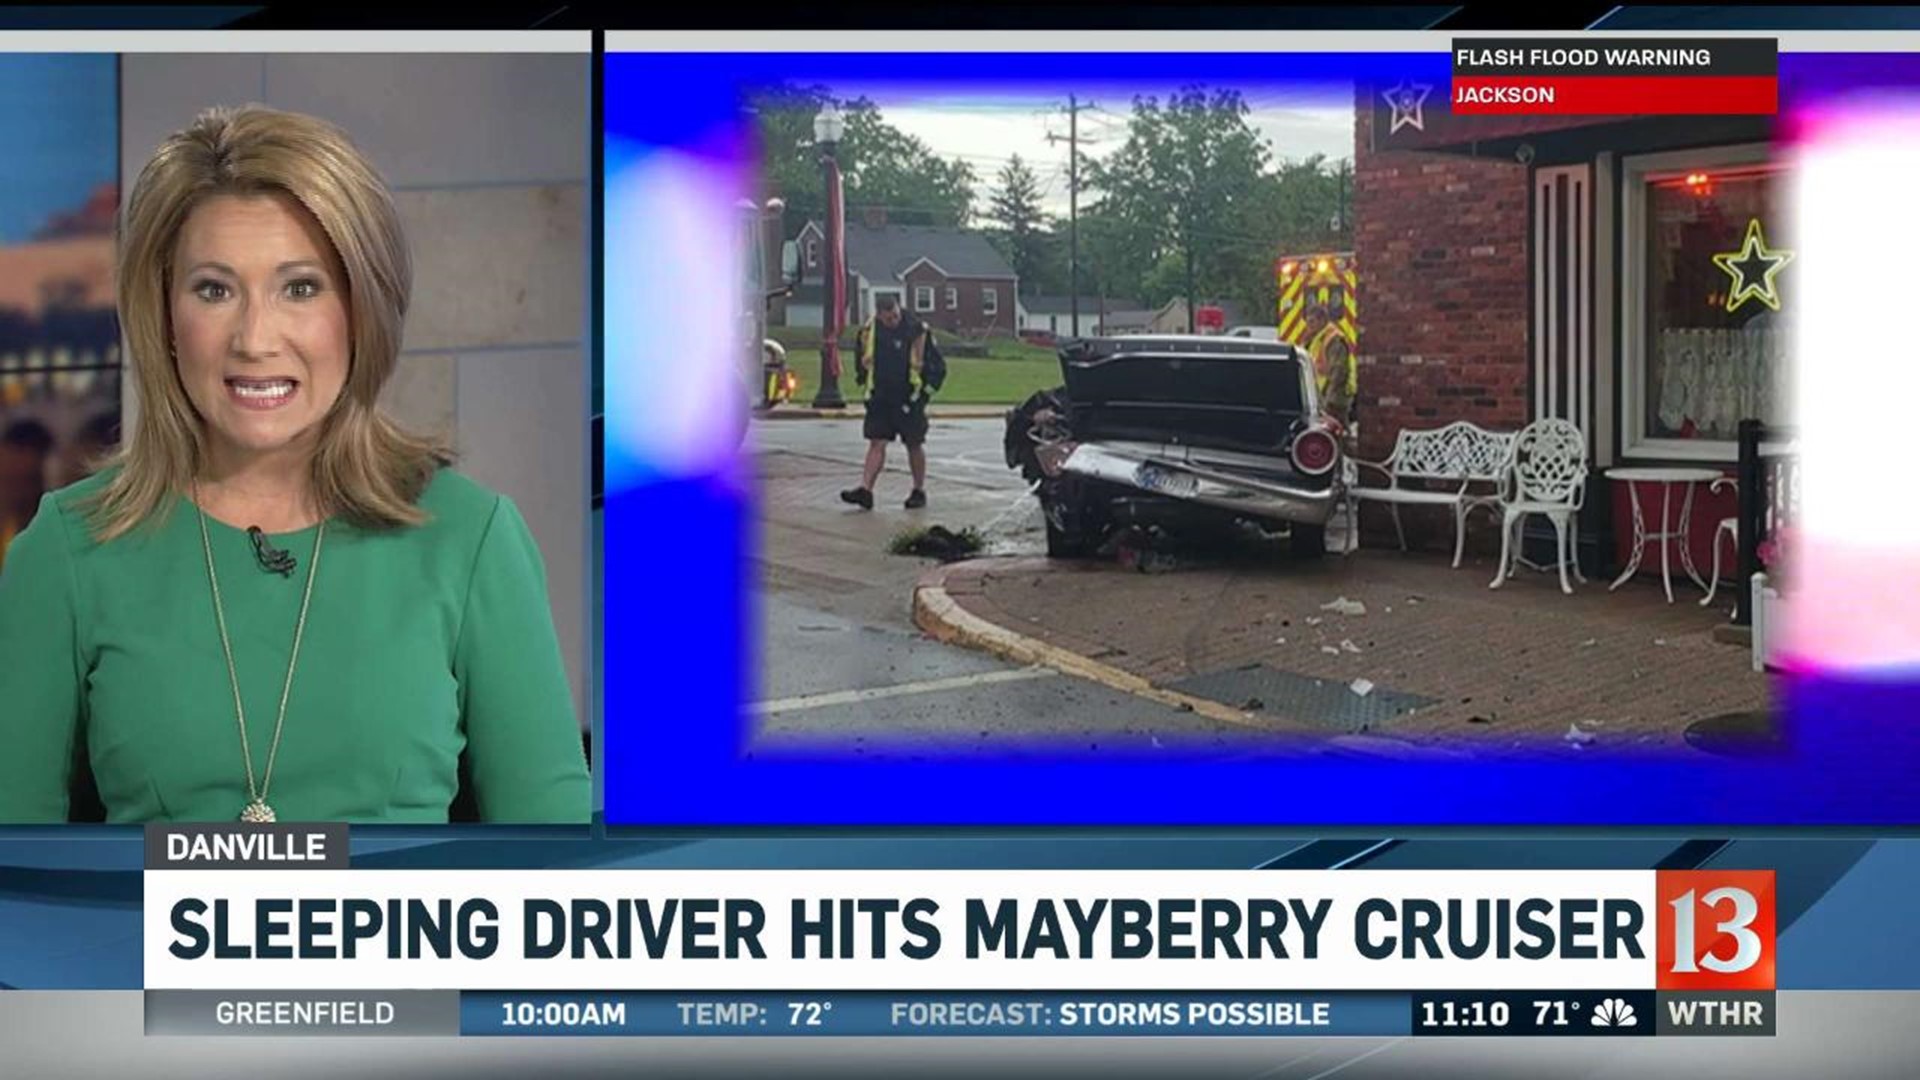 Sleeping Driver Hits Mayberry Cruiser in Danville